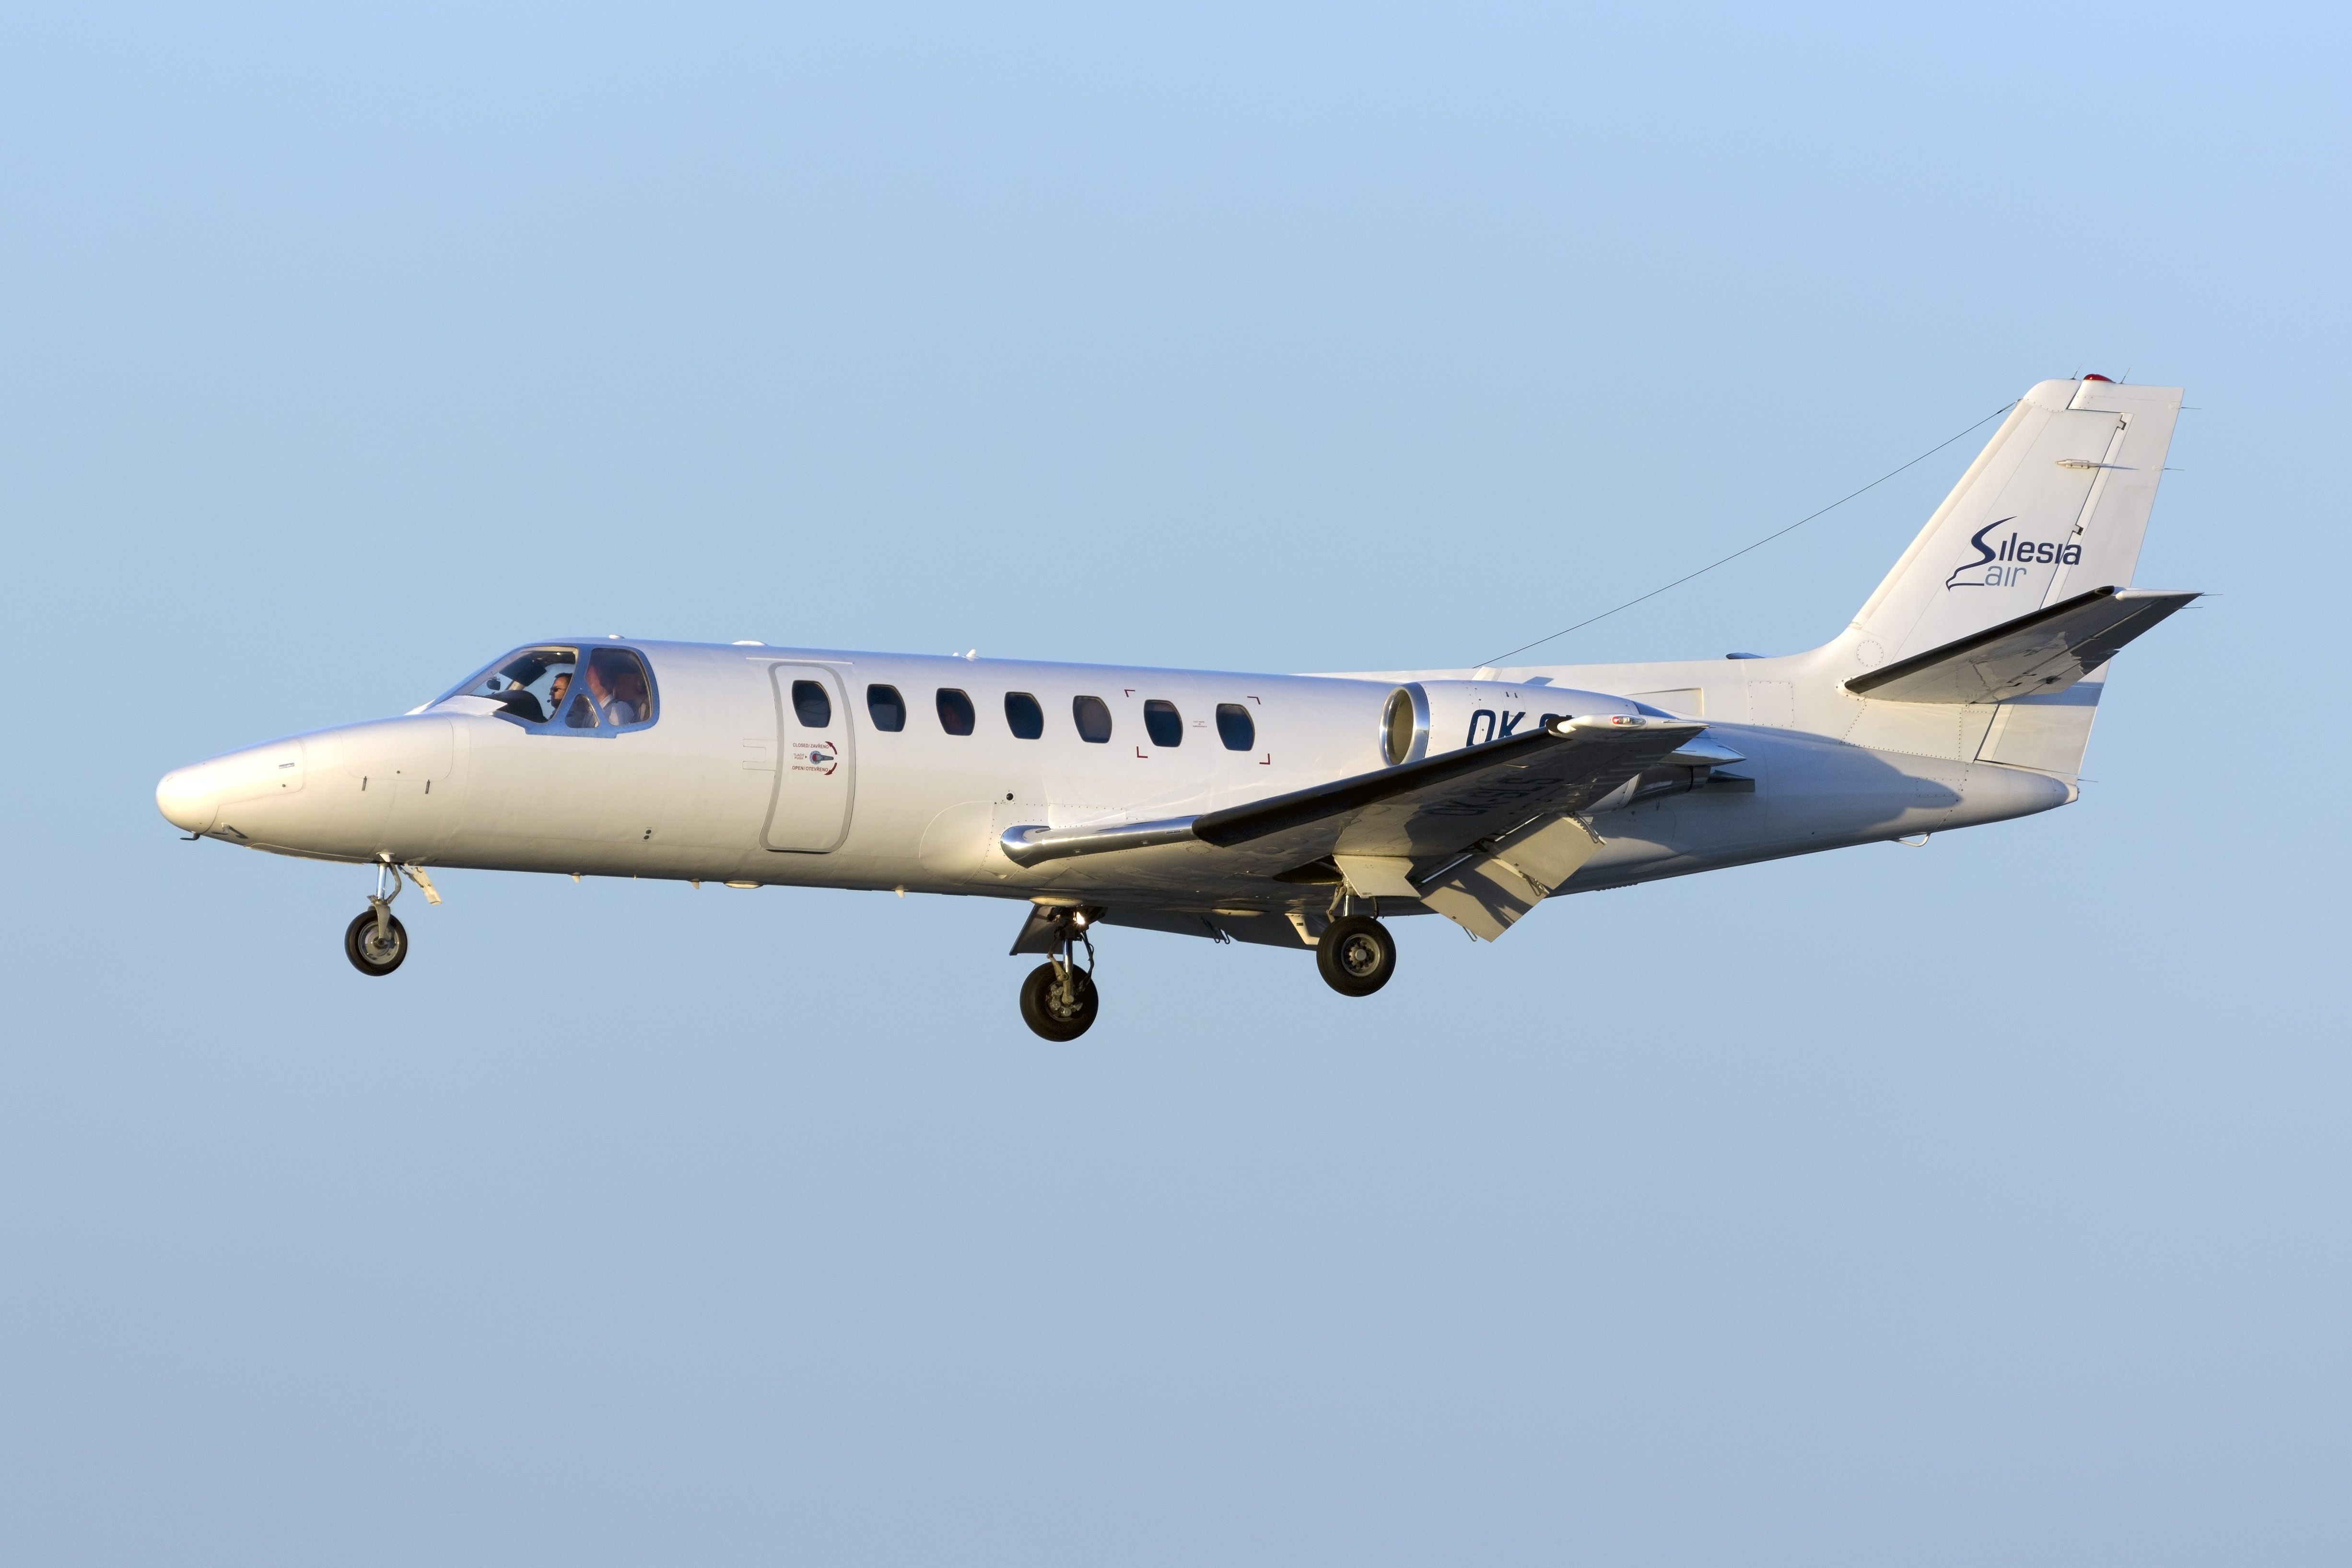 A Silesia Air Cessna 560 Citation V flying in the sky.